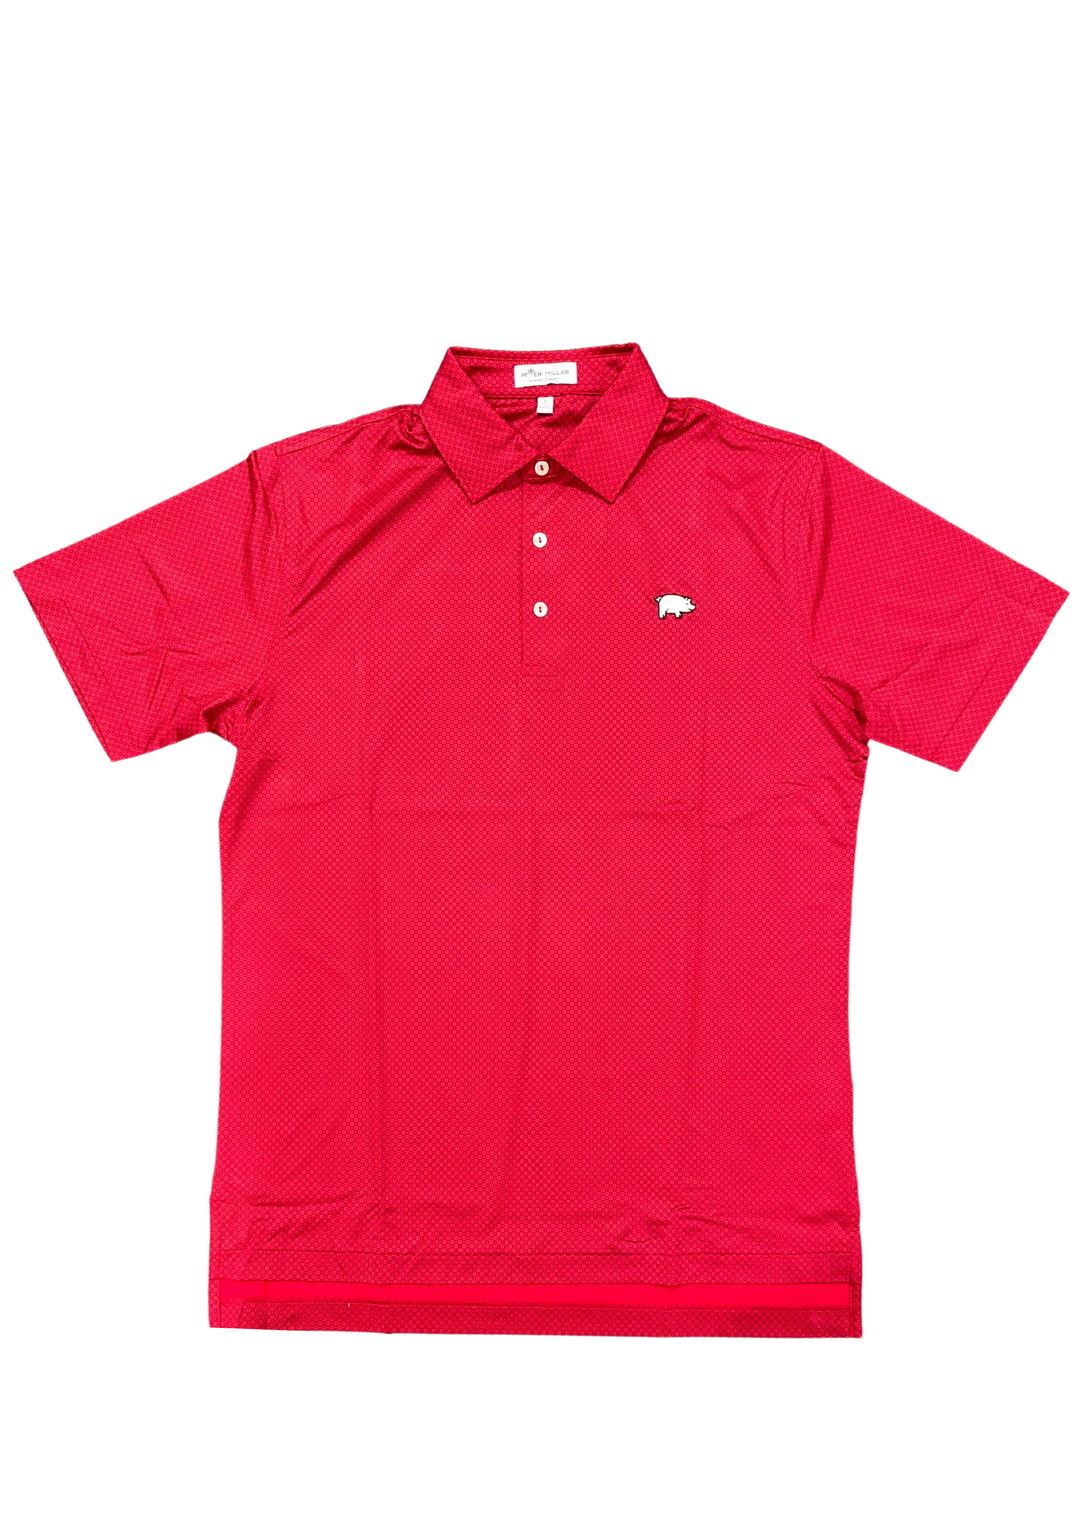 Curly Tail Dolly Performance Polo